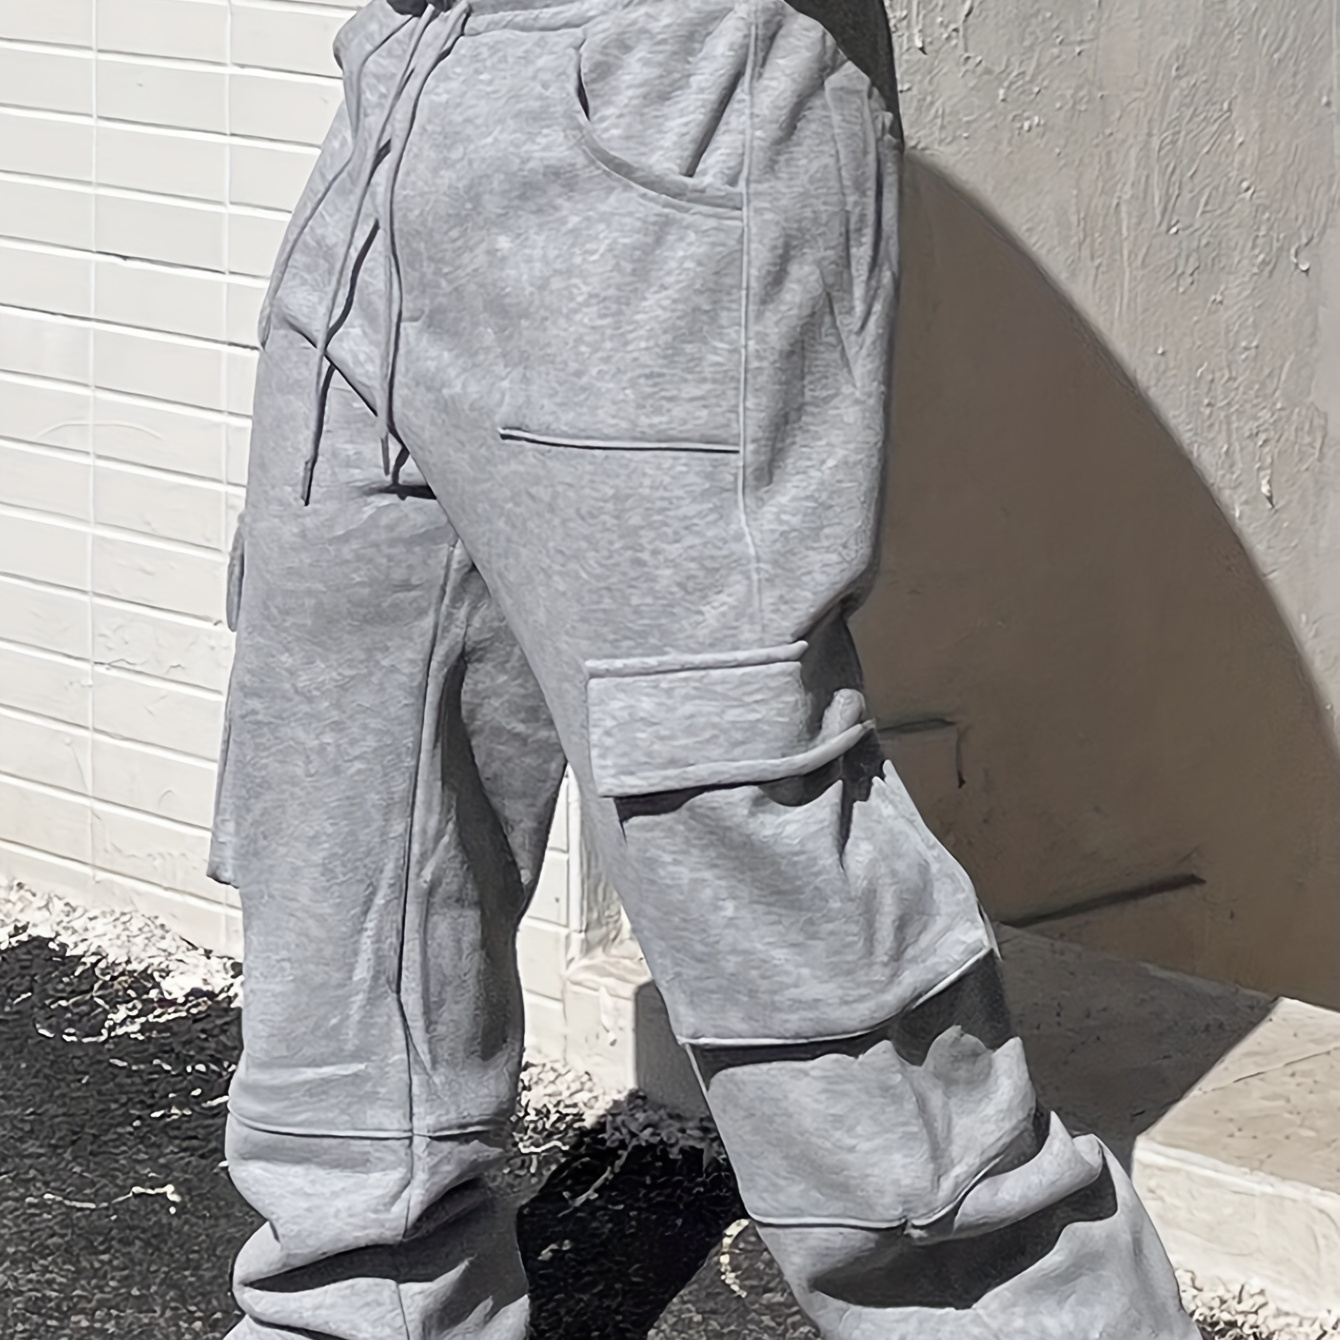 

Men's Spring And Autumn Fashion, Solid Loose Fit Leisure Pants With Flap Pockets, Chic And Comfy Sports Trousers Versatile For Daily Outerwear